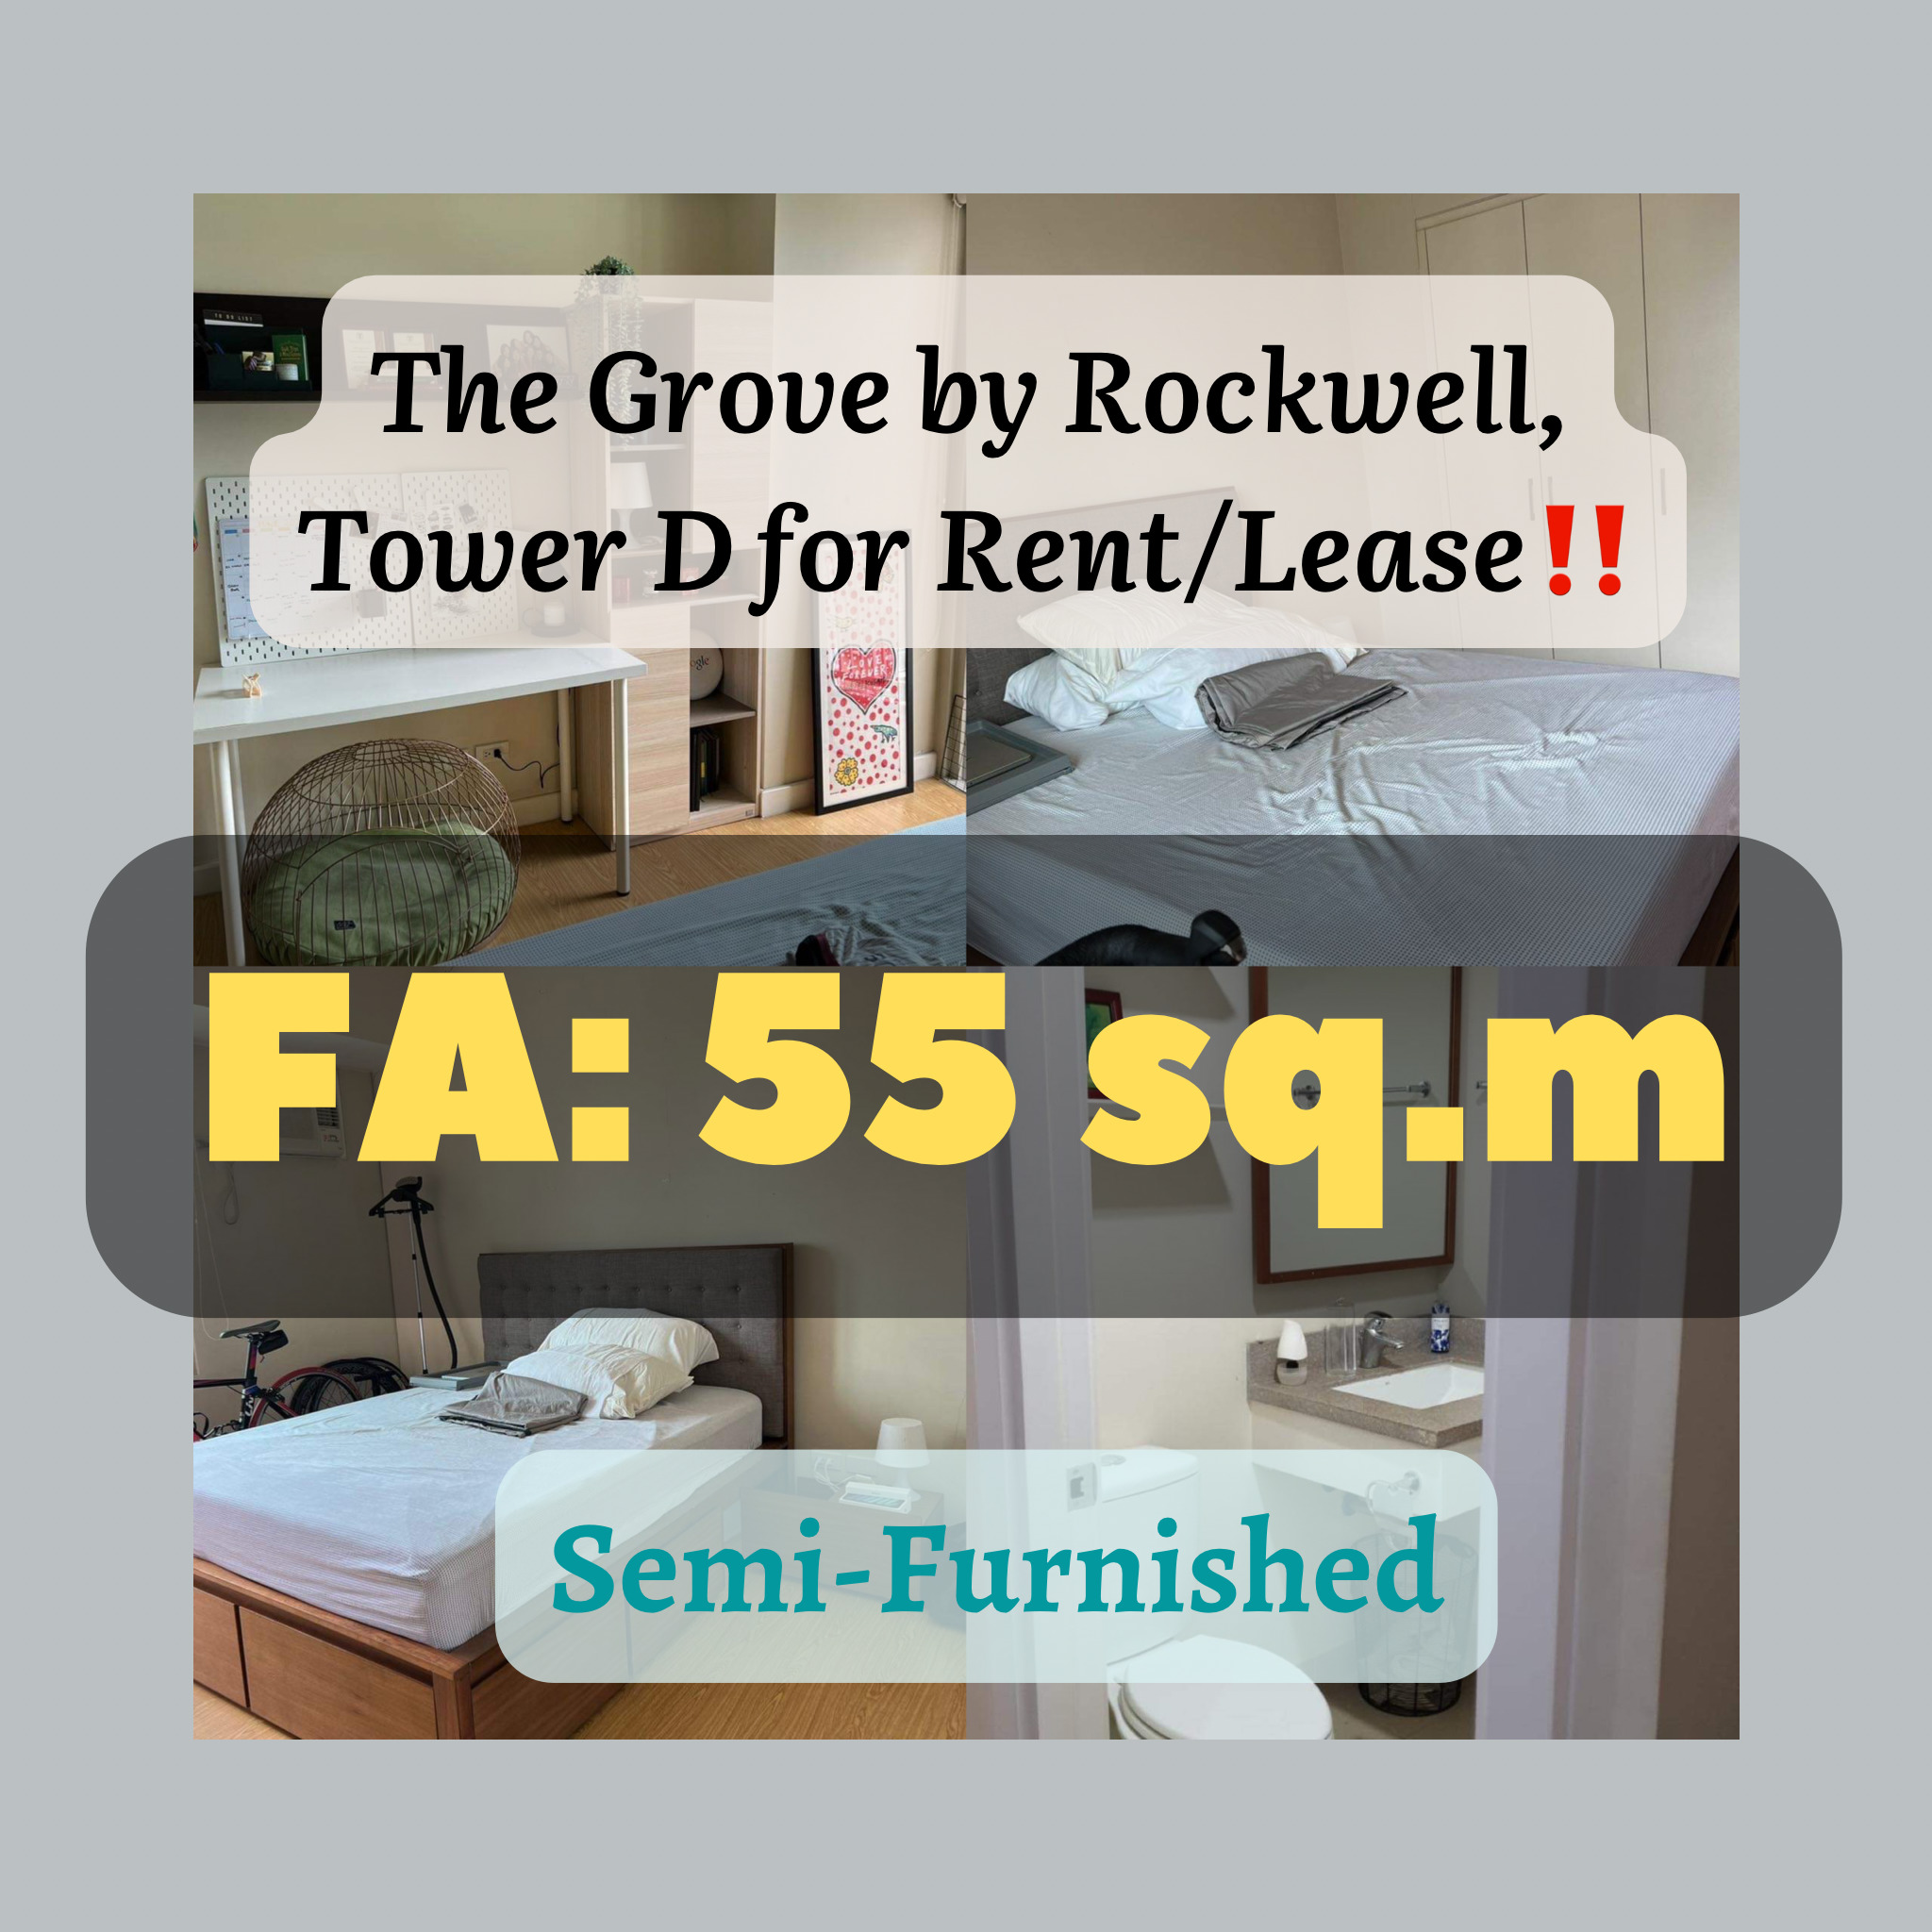 The Grove by Rockwell, Tower D for Rent/Lease‼️